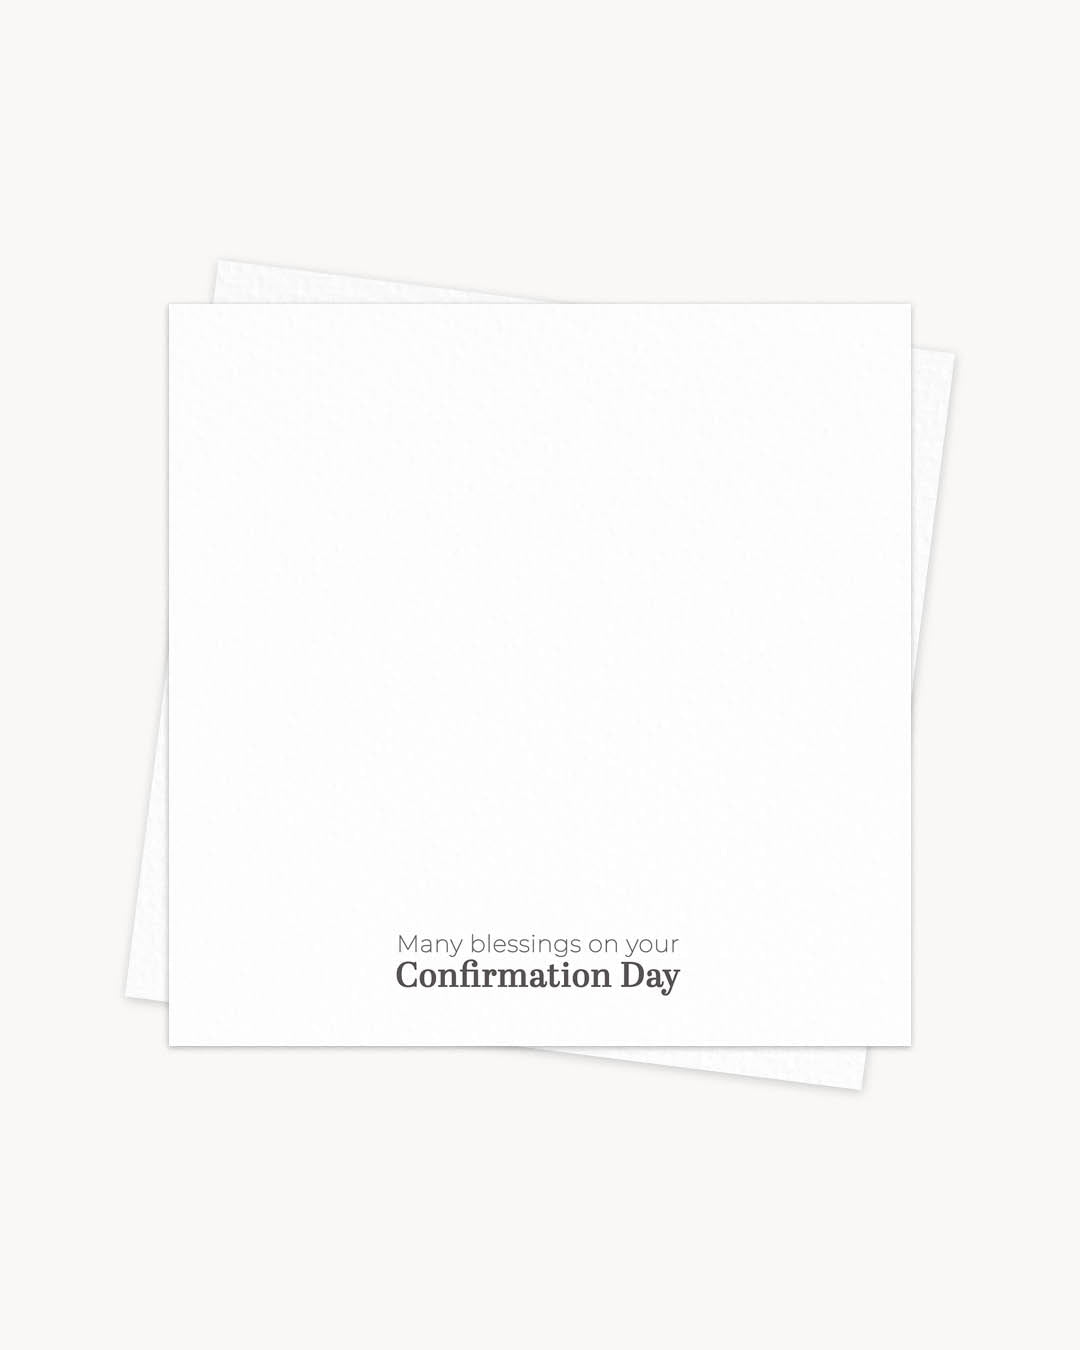 Confirmation Day Gift Card